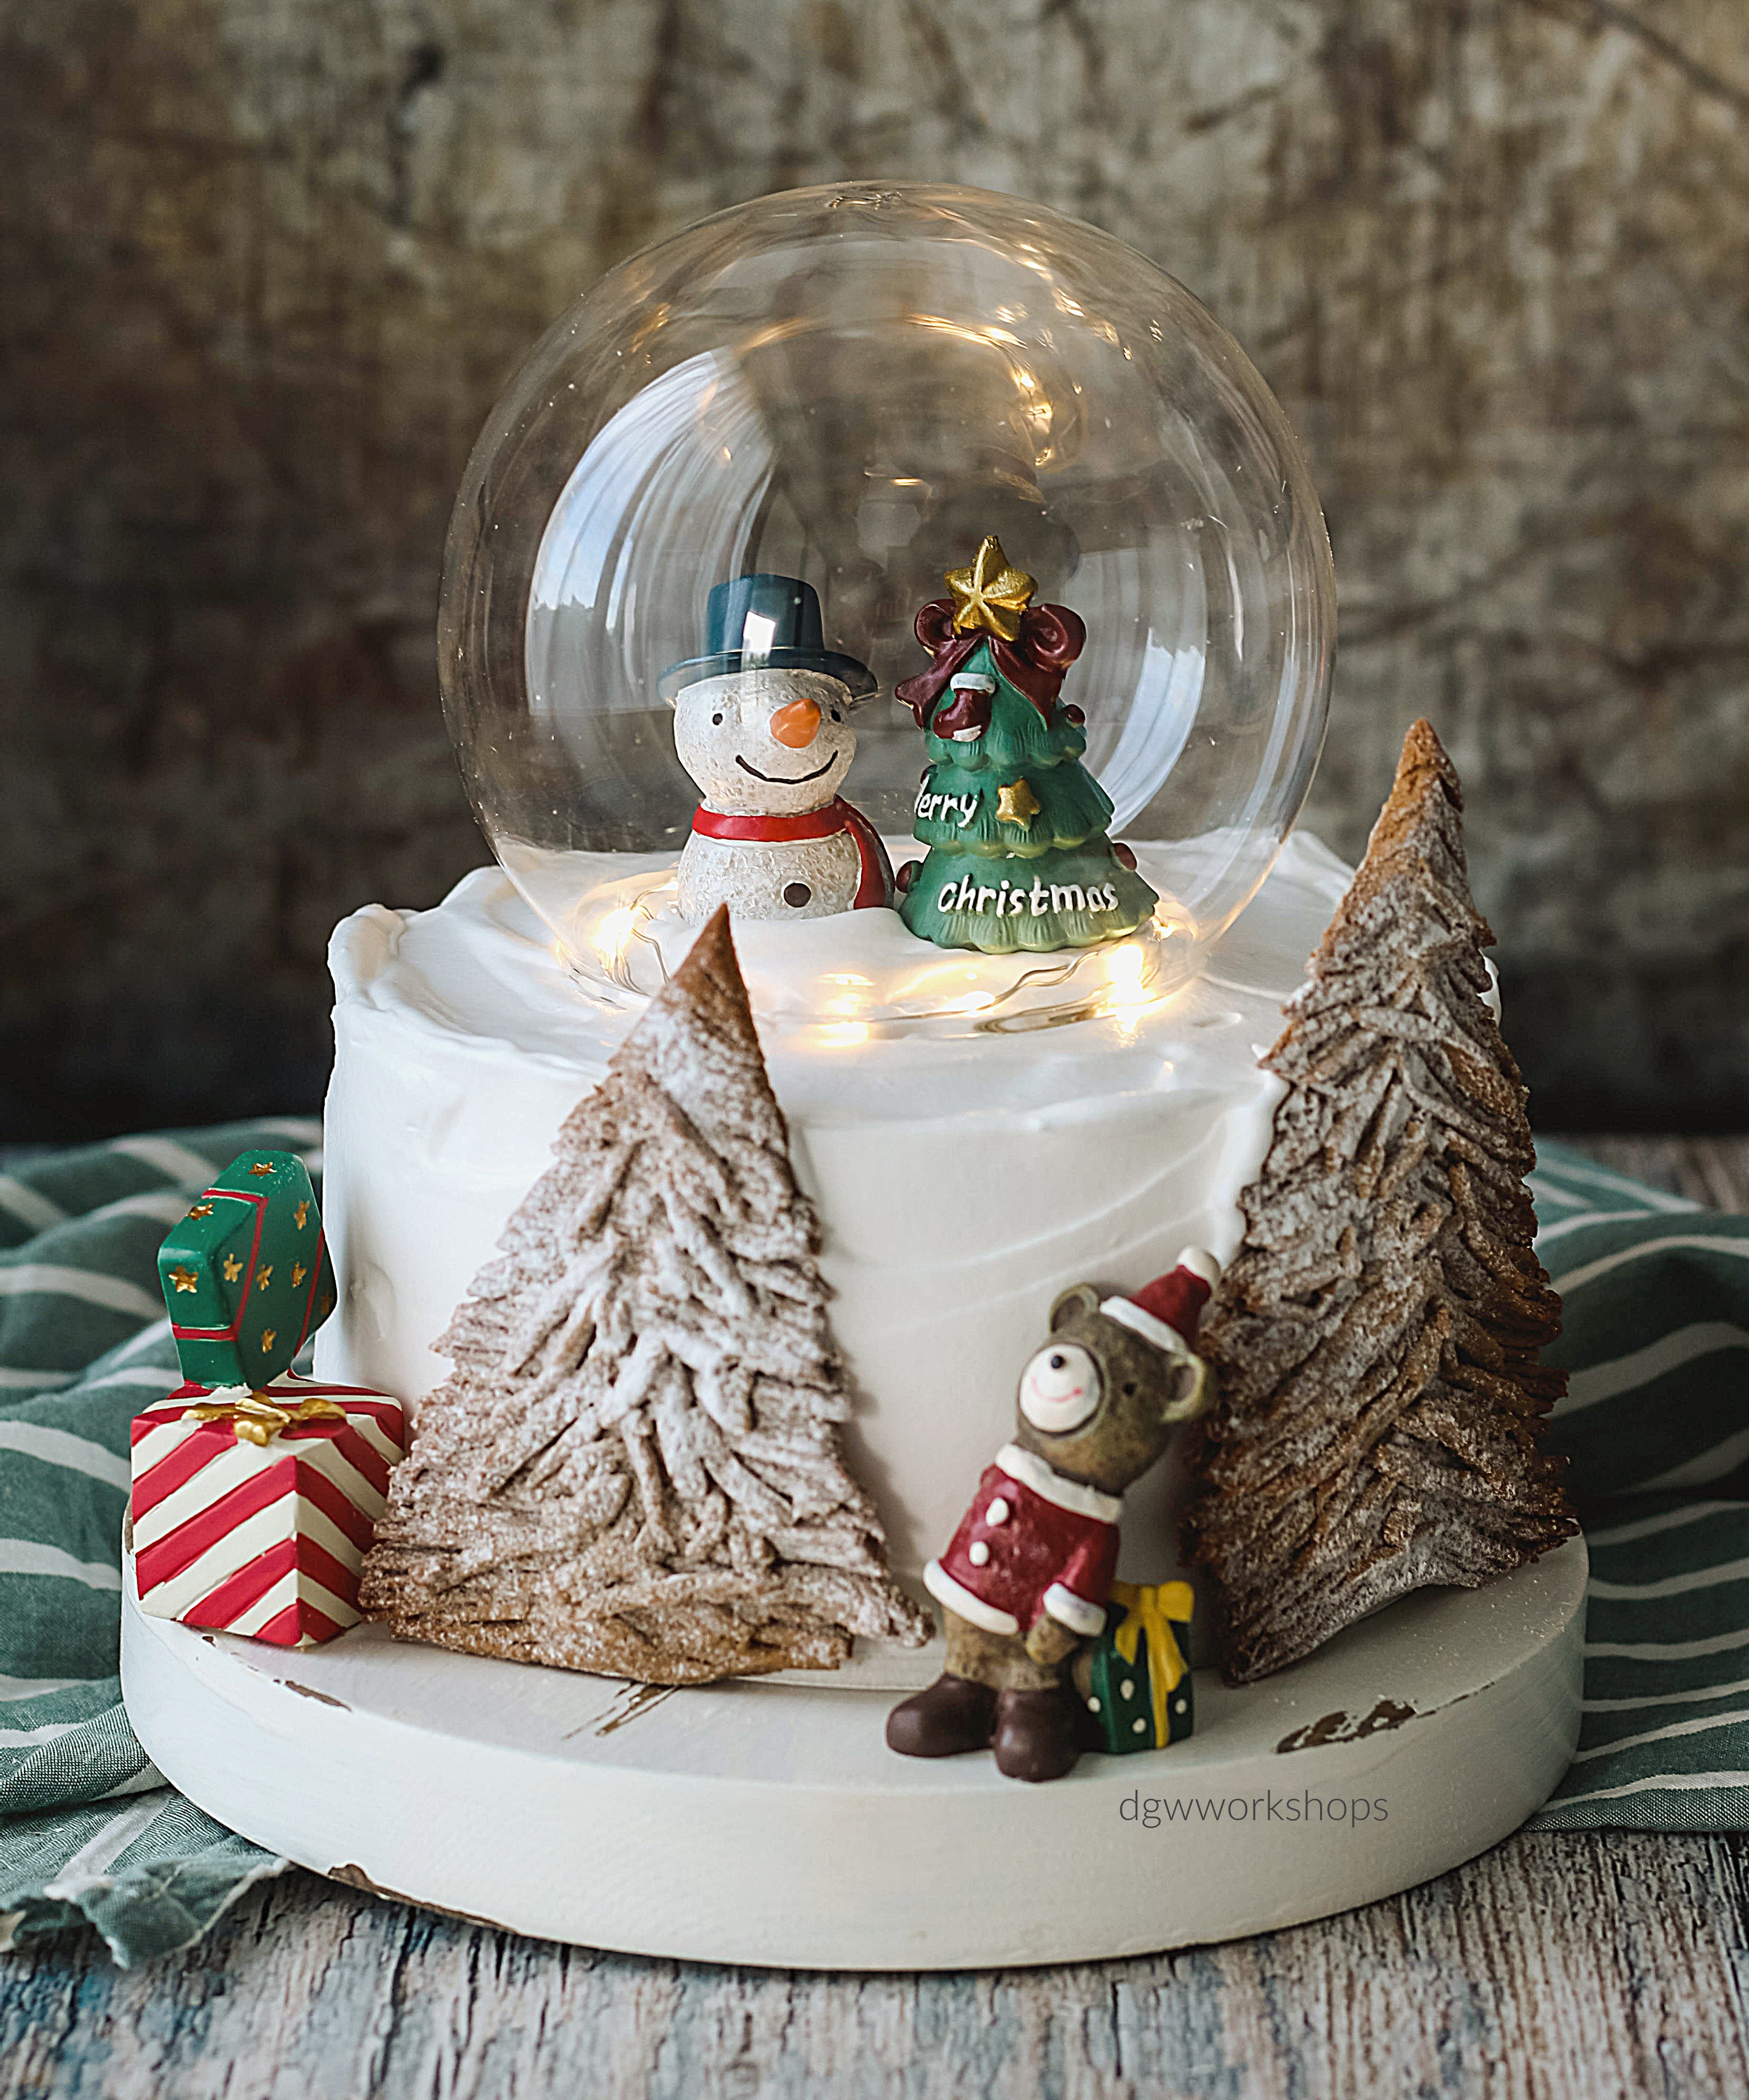 How To Create A Snowy Effect With Royal Icing & Decorate A Christmas Cake  With A Retro Set - YouTube